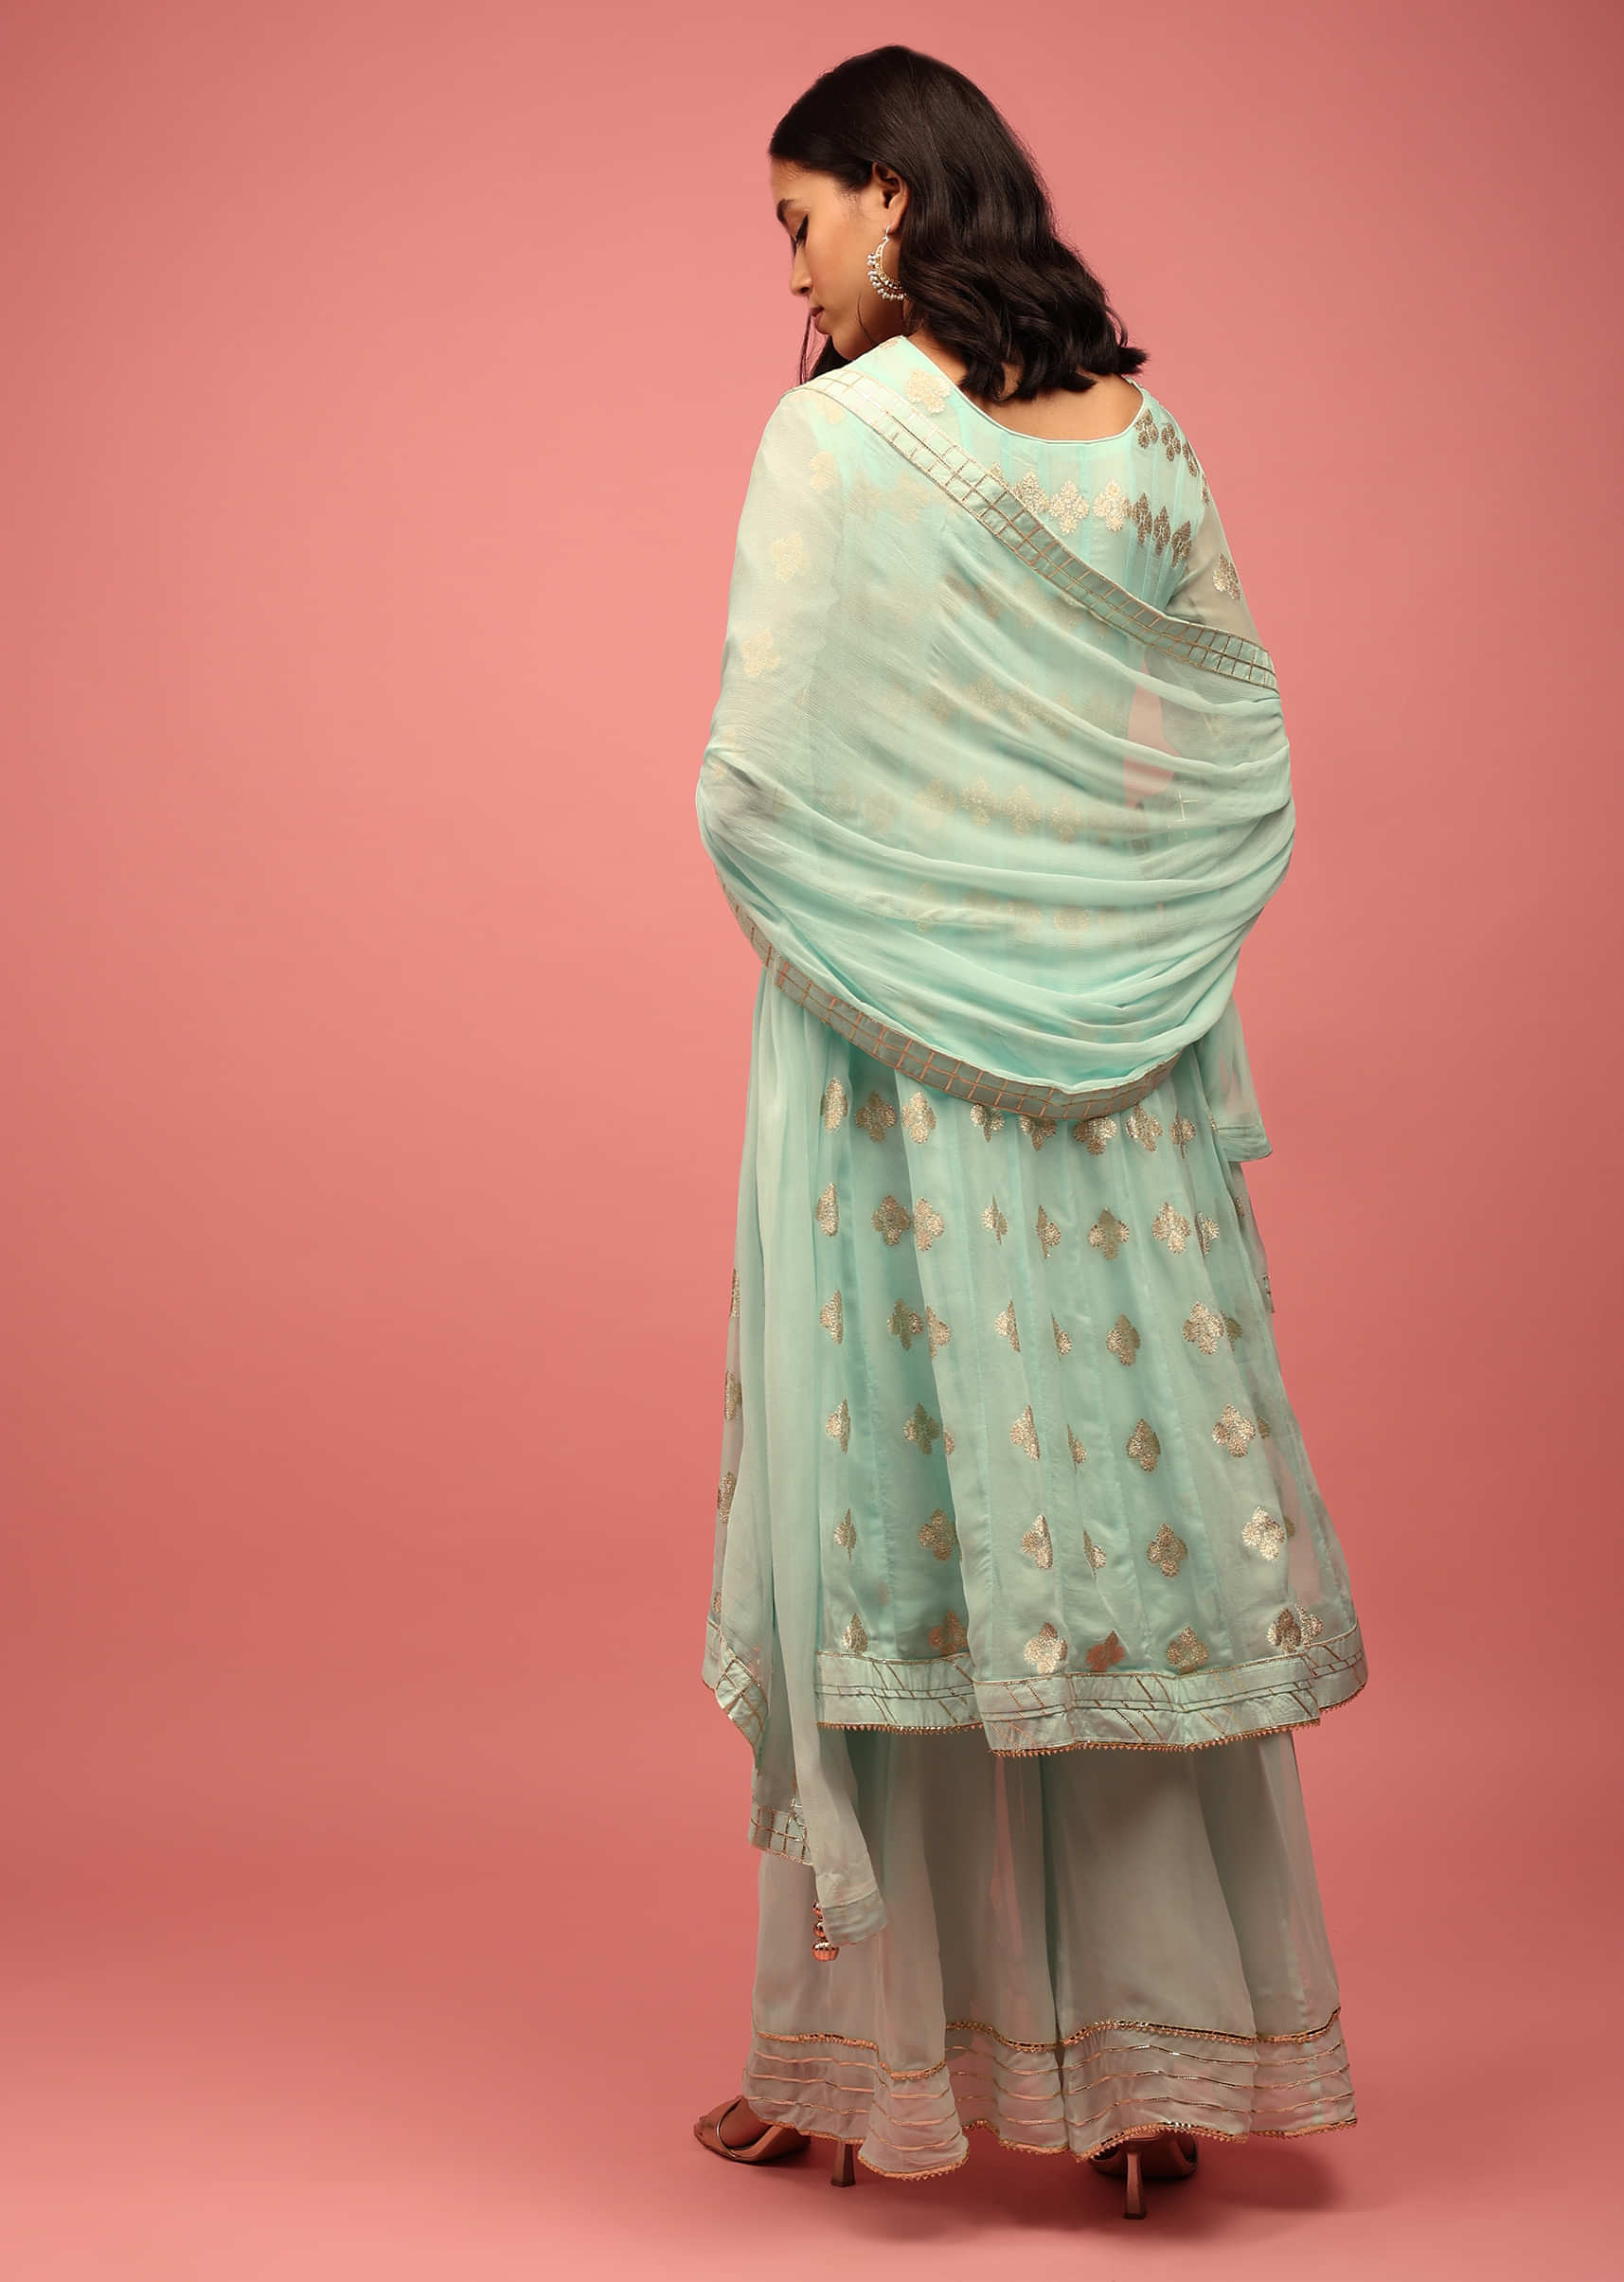 Sea Green Georgette Anarkali Suit With Embroidery